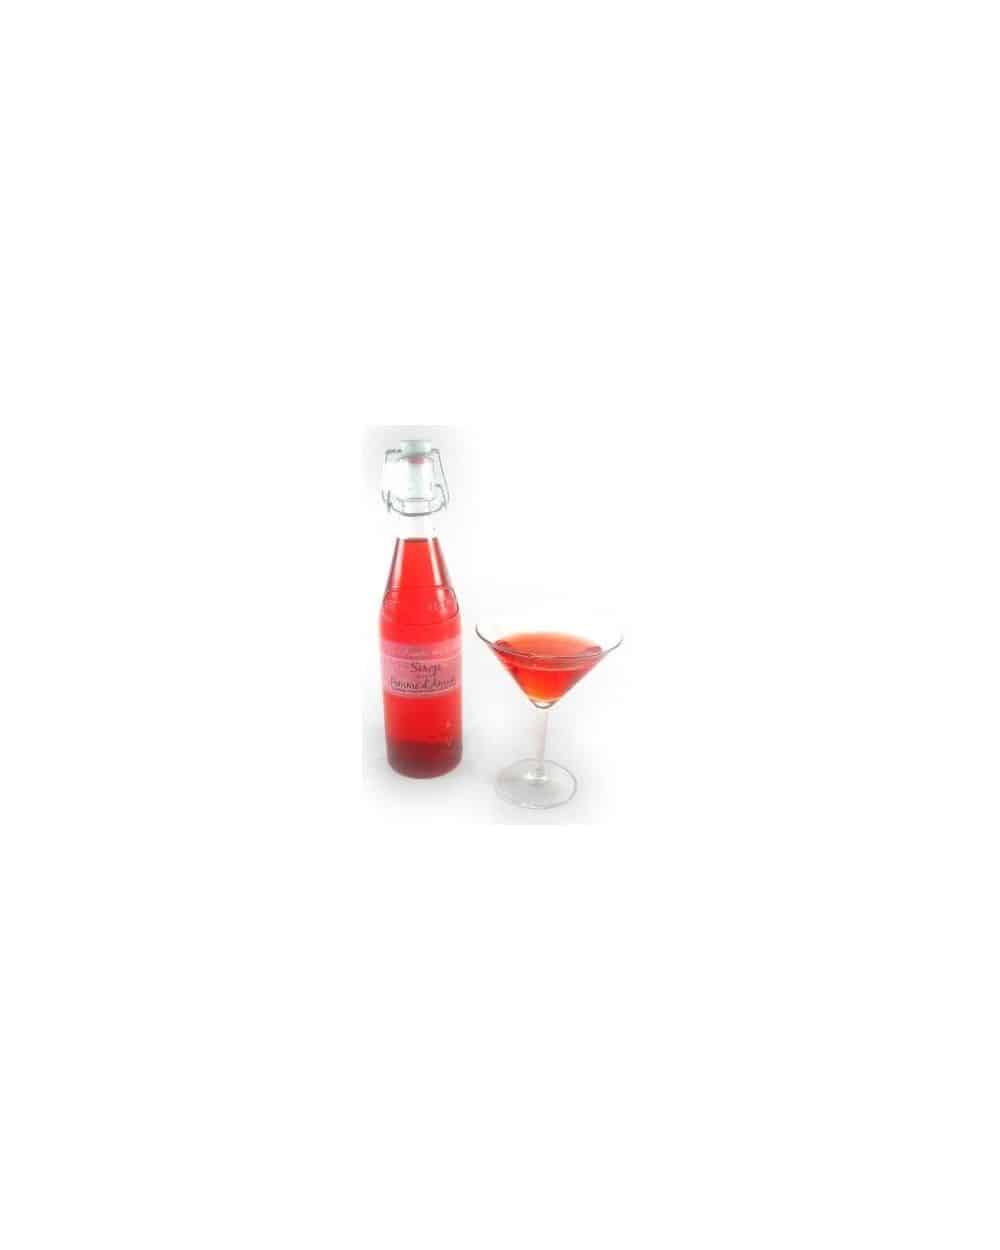 Sirop pomme d'amour 50cl